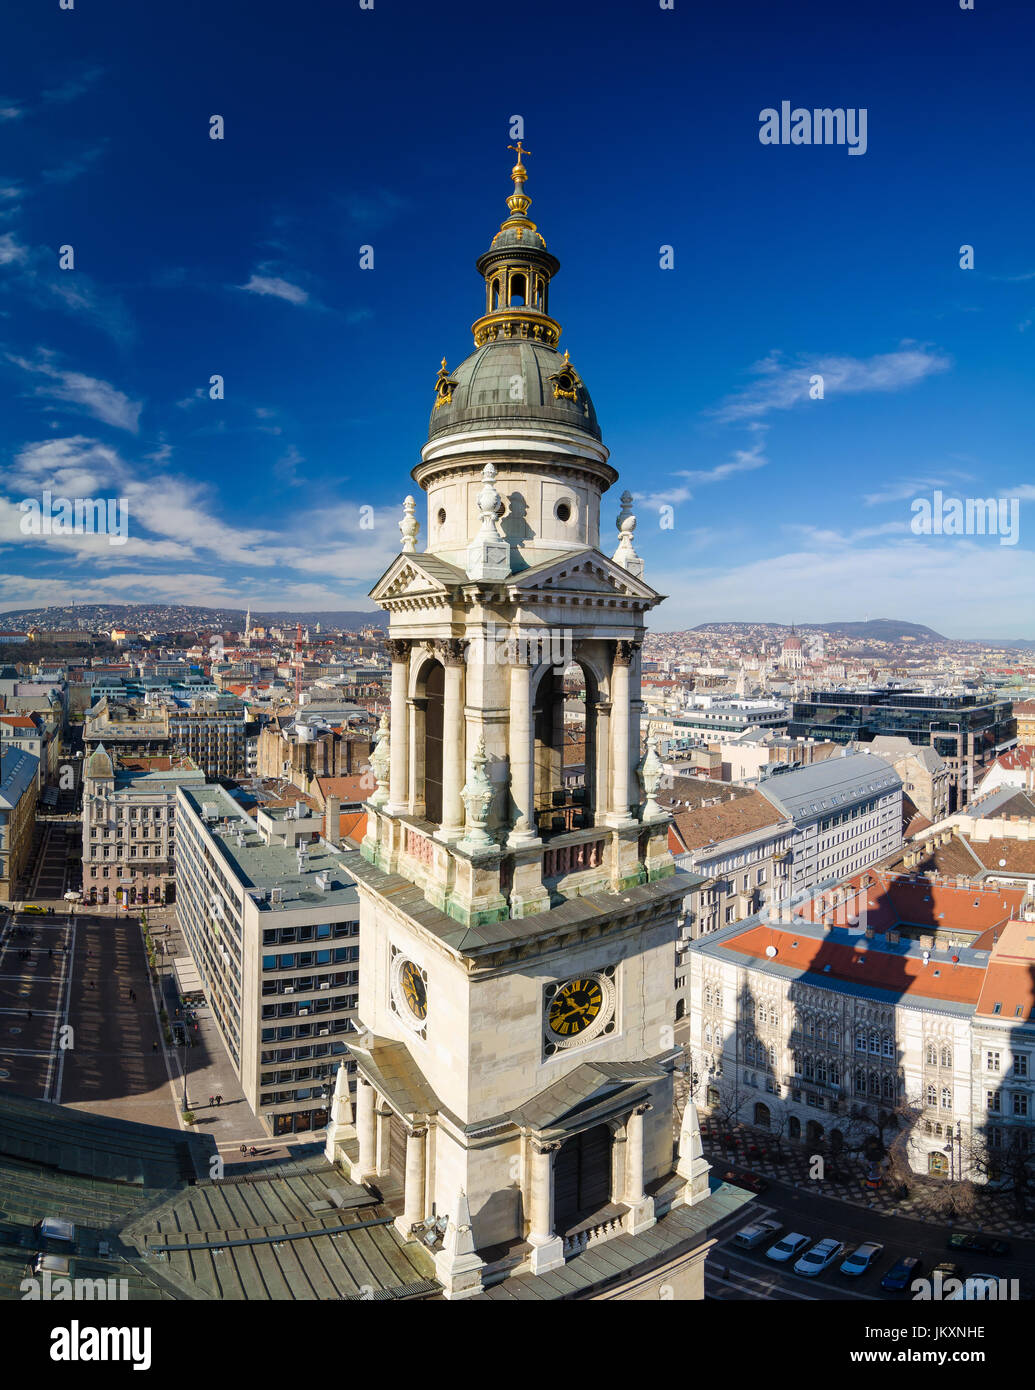 BUDAPEST, HUNGARY - FEBRUARY 22, 2016: Panorama of Budapest, Hungary taken from the tower of Saint Istvan cathedral Stock Photo